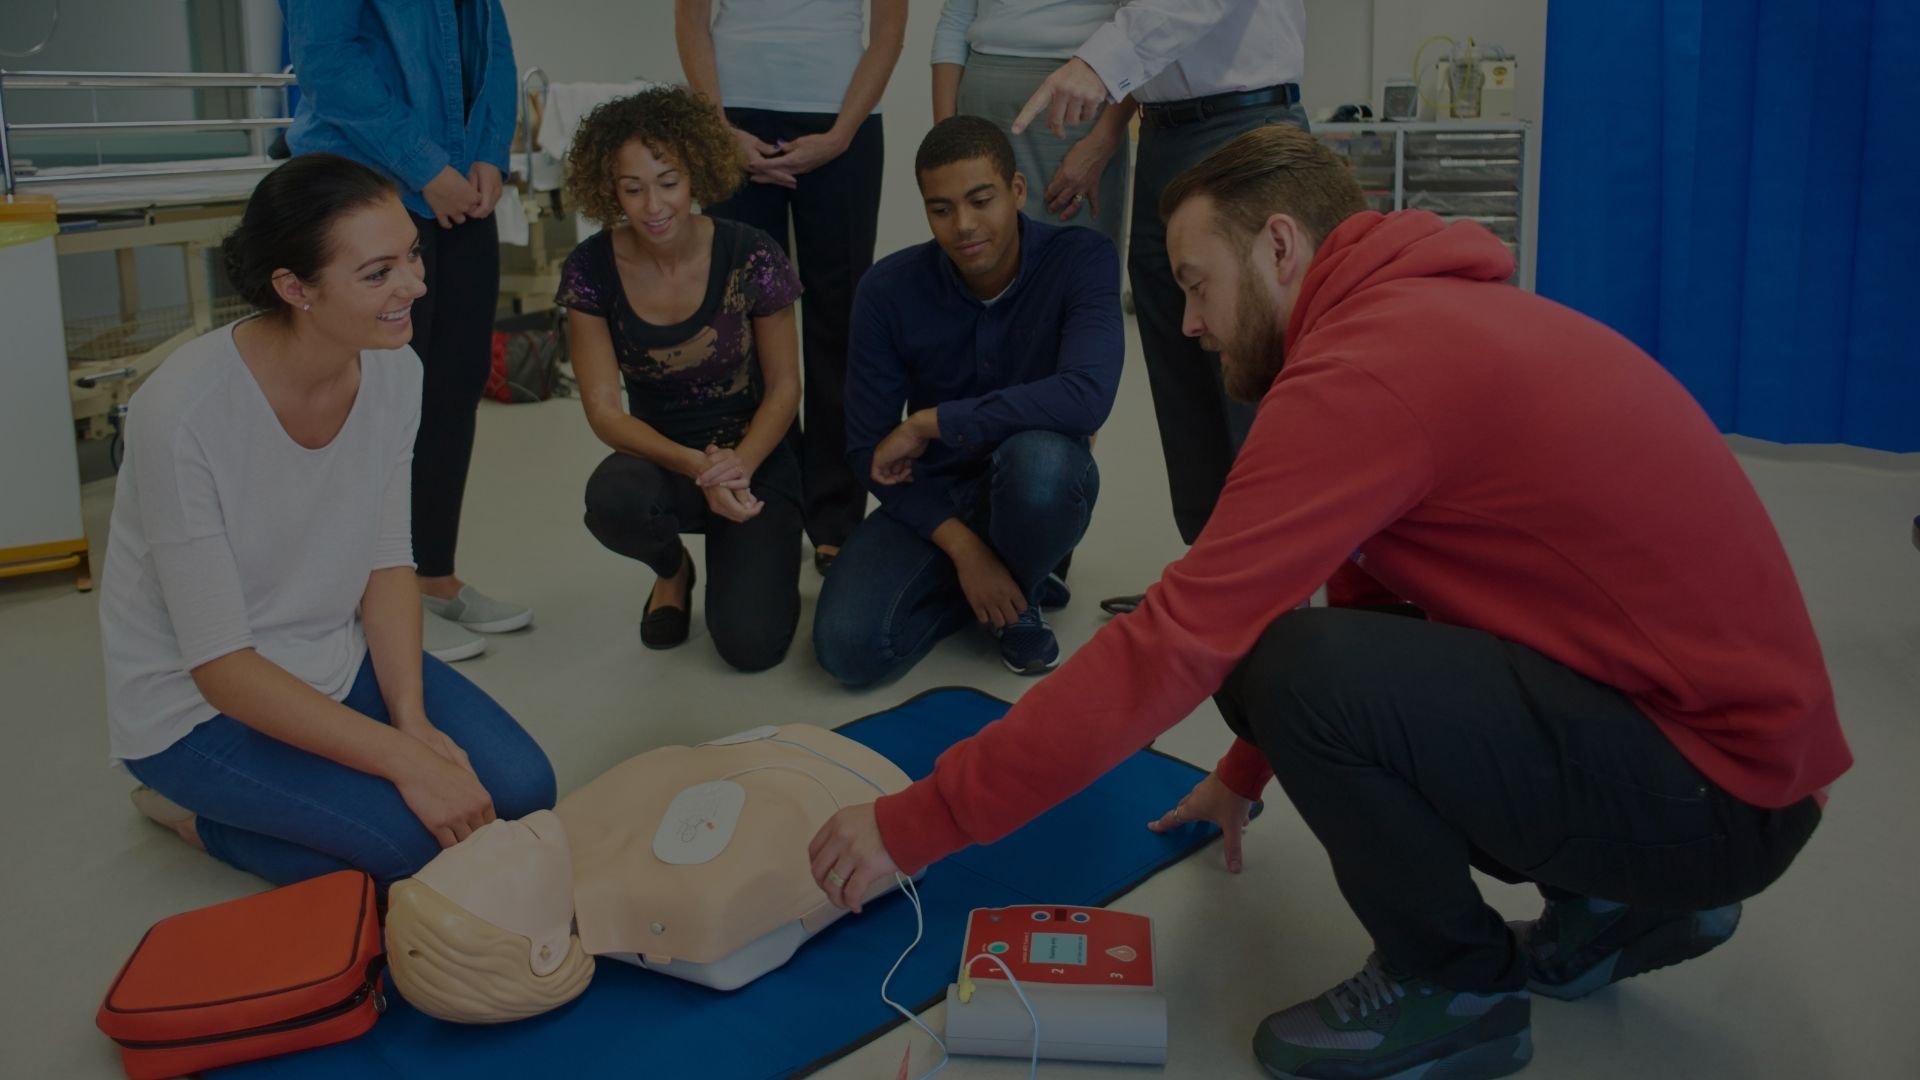 CPR Today vs CPR a Decade Ago: The Key Differences